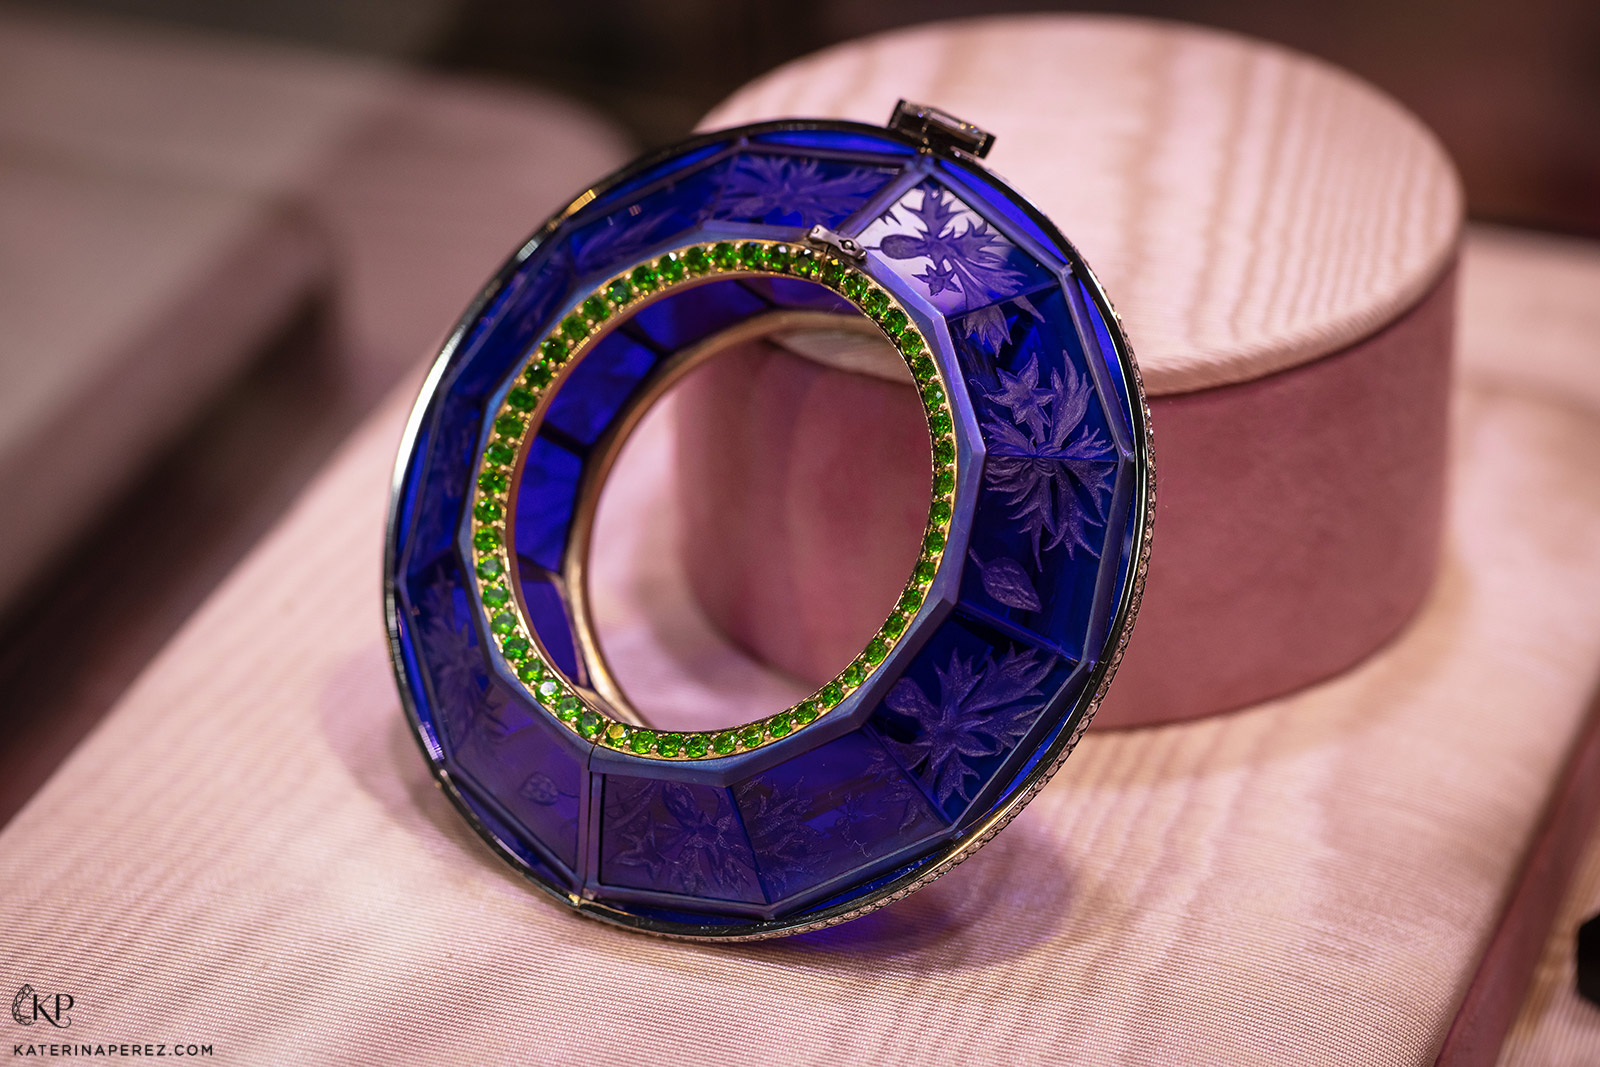 Ninotchka bracelet in titanium, gold and silver, decorated with stained glass enamel, modern hand-carved antique cobalt glass, 400 Russian unheated demantoid garnets and 2 portrait diamonds with a secret message. Photo: Simon Martner